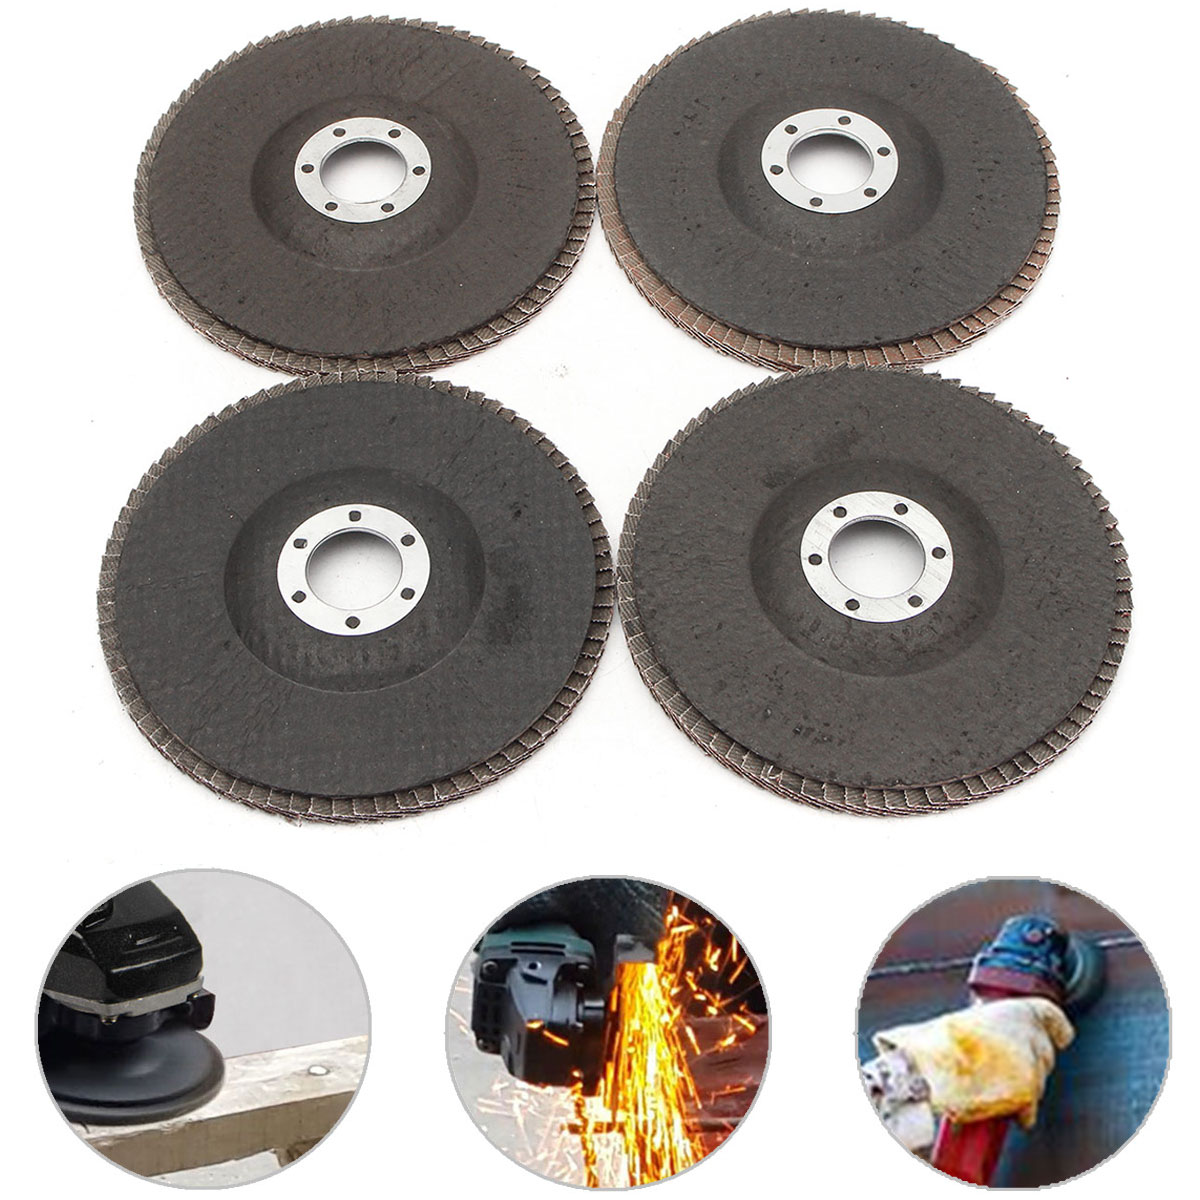 Aluminum Oxide Grinding Wheels 60 and 120 Grit